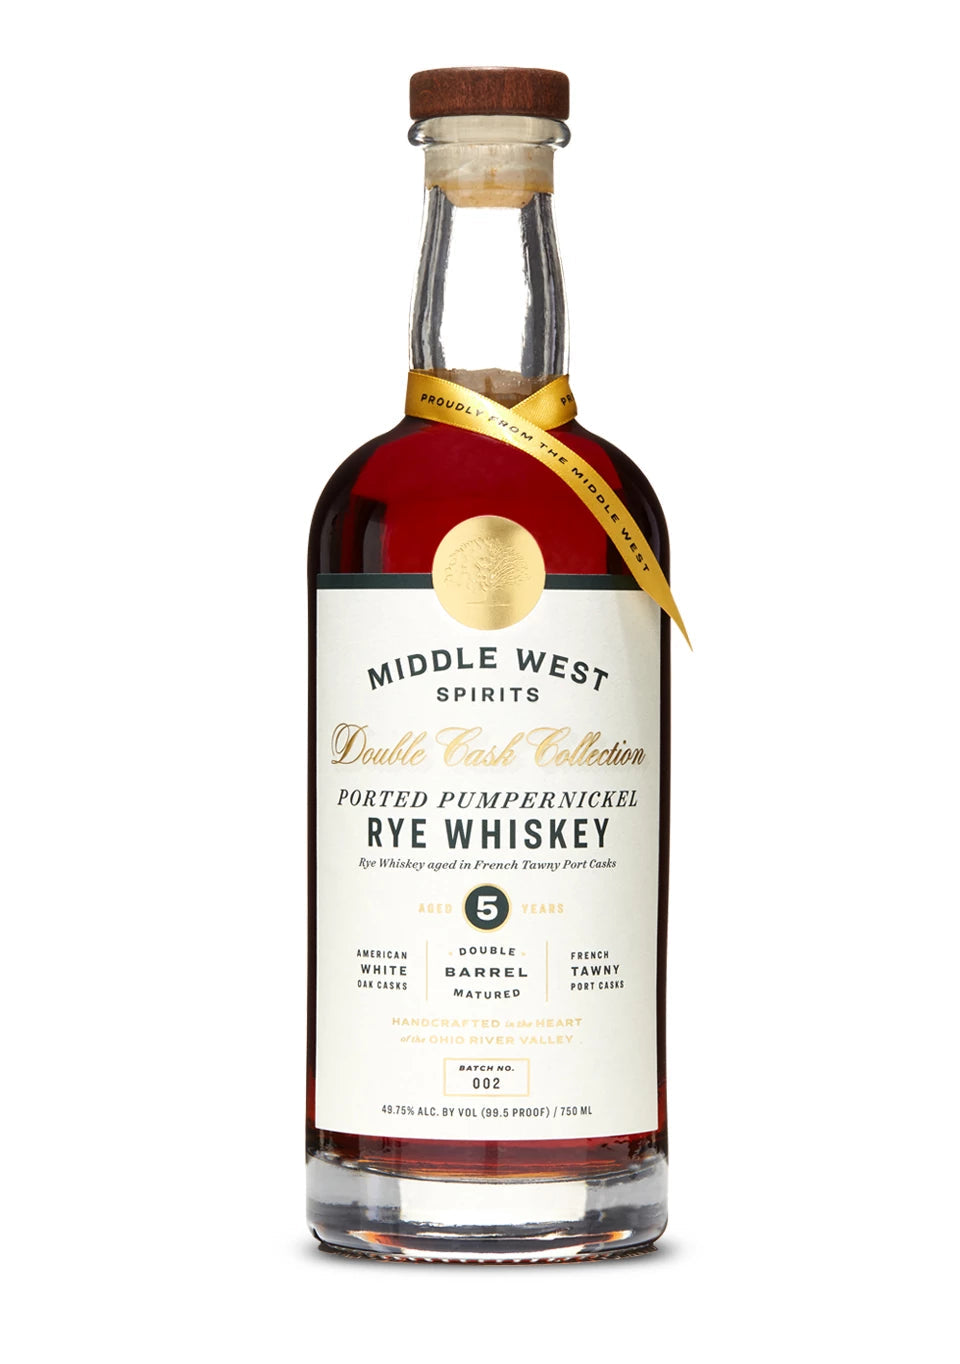 Middle West Spirits Double Cask Collection Pumpernickel Rye Whiskey